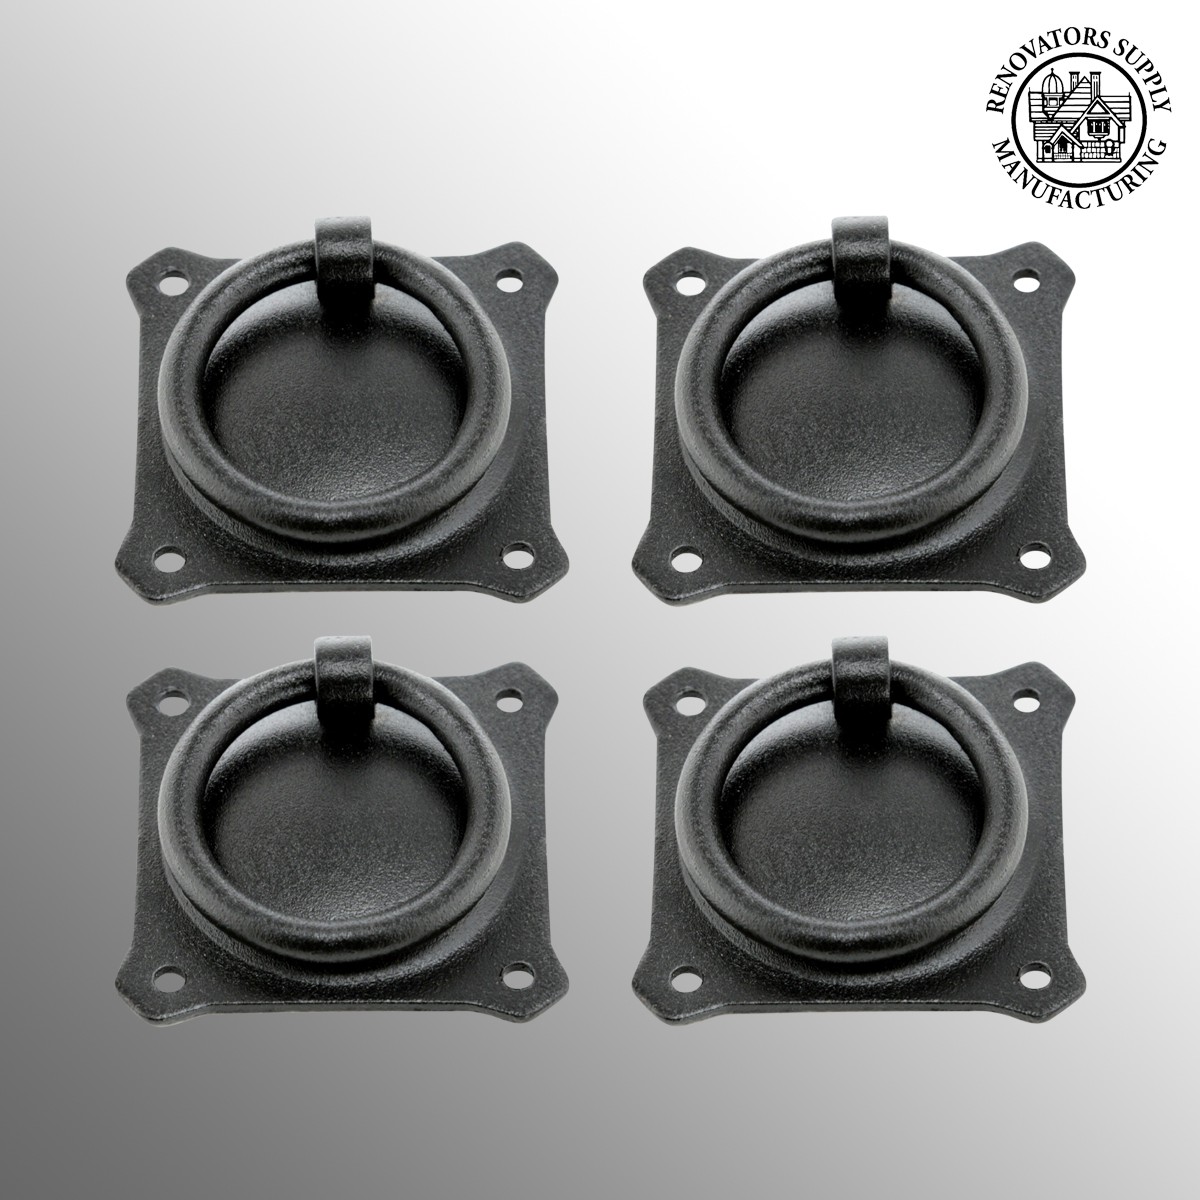 Renovators Supply Wrought Iron Mission Style Ring Pull Black Cabinet 2in Set of 4 - image 2 of 6